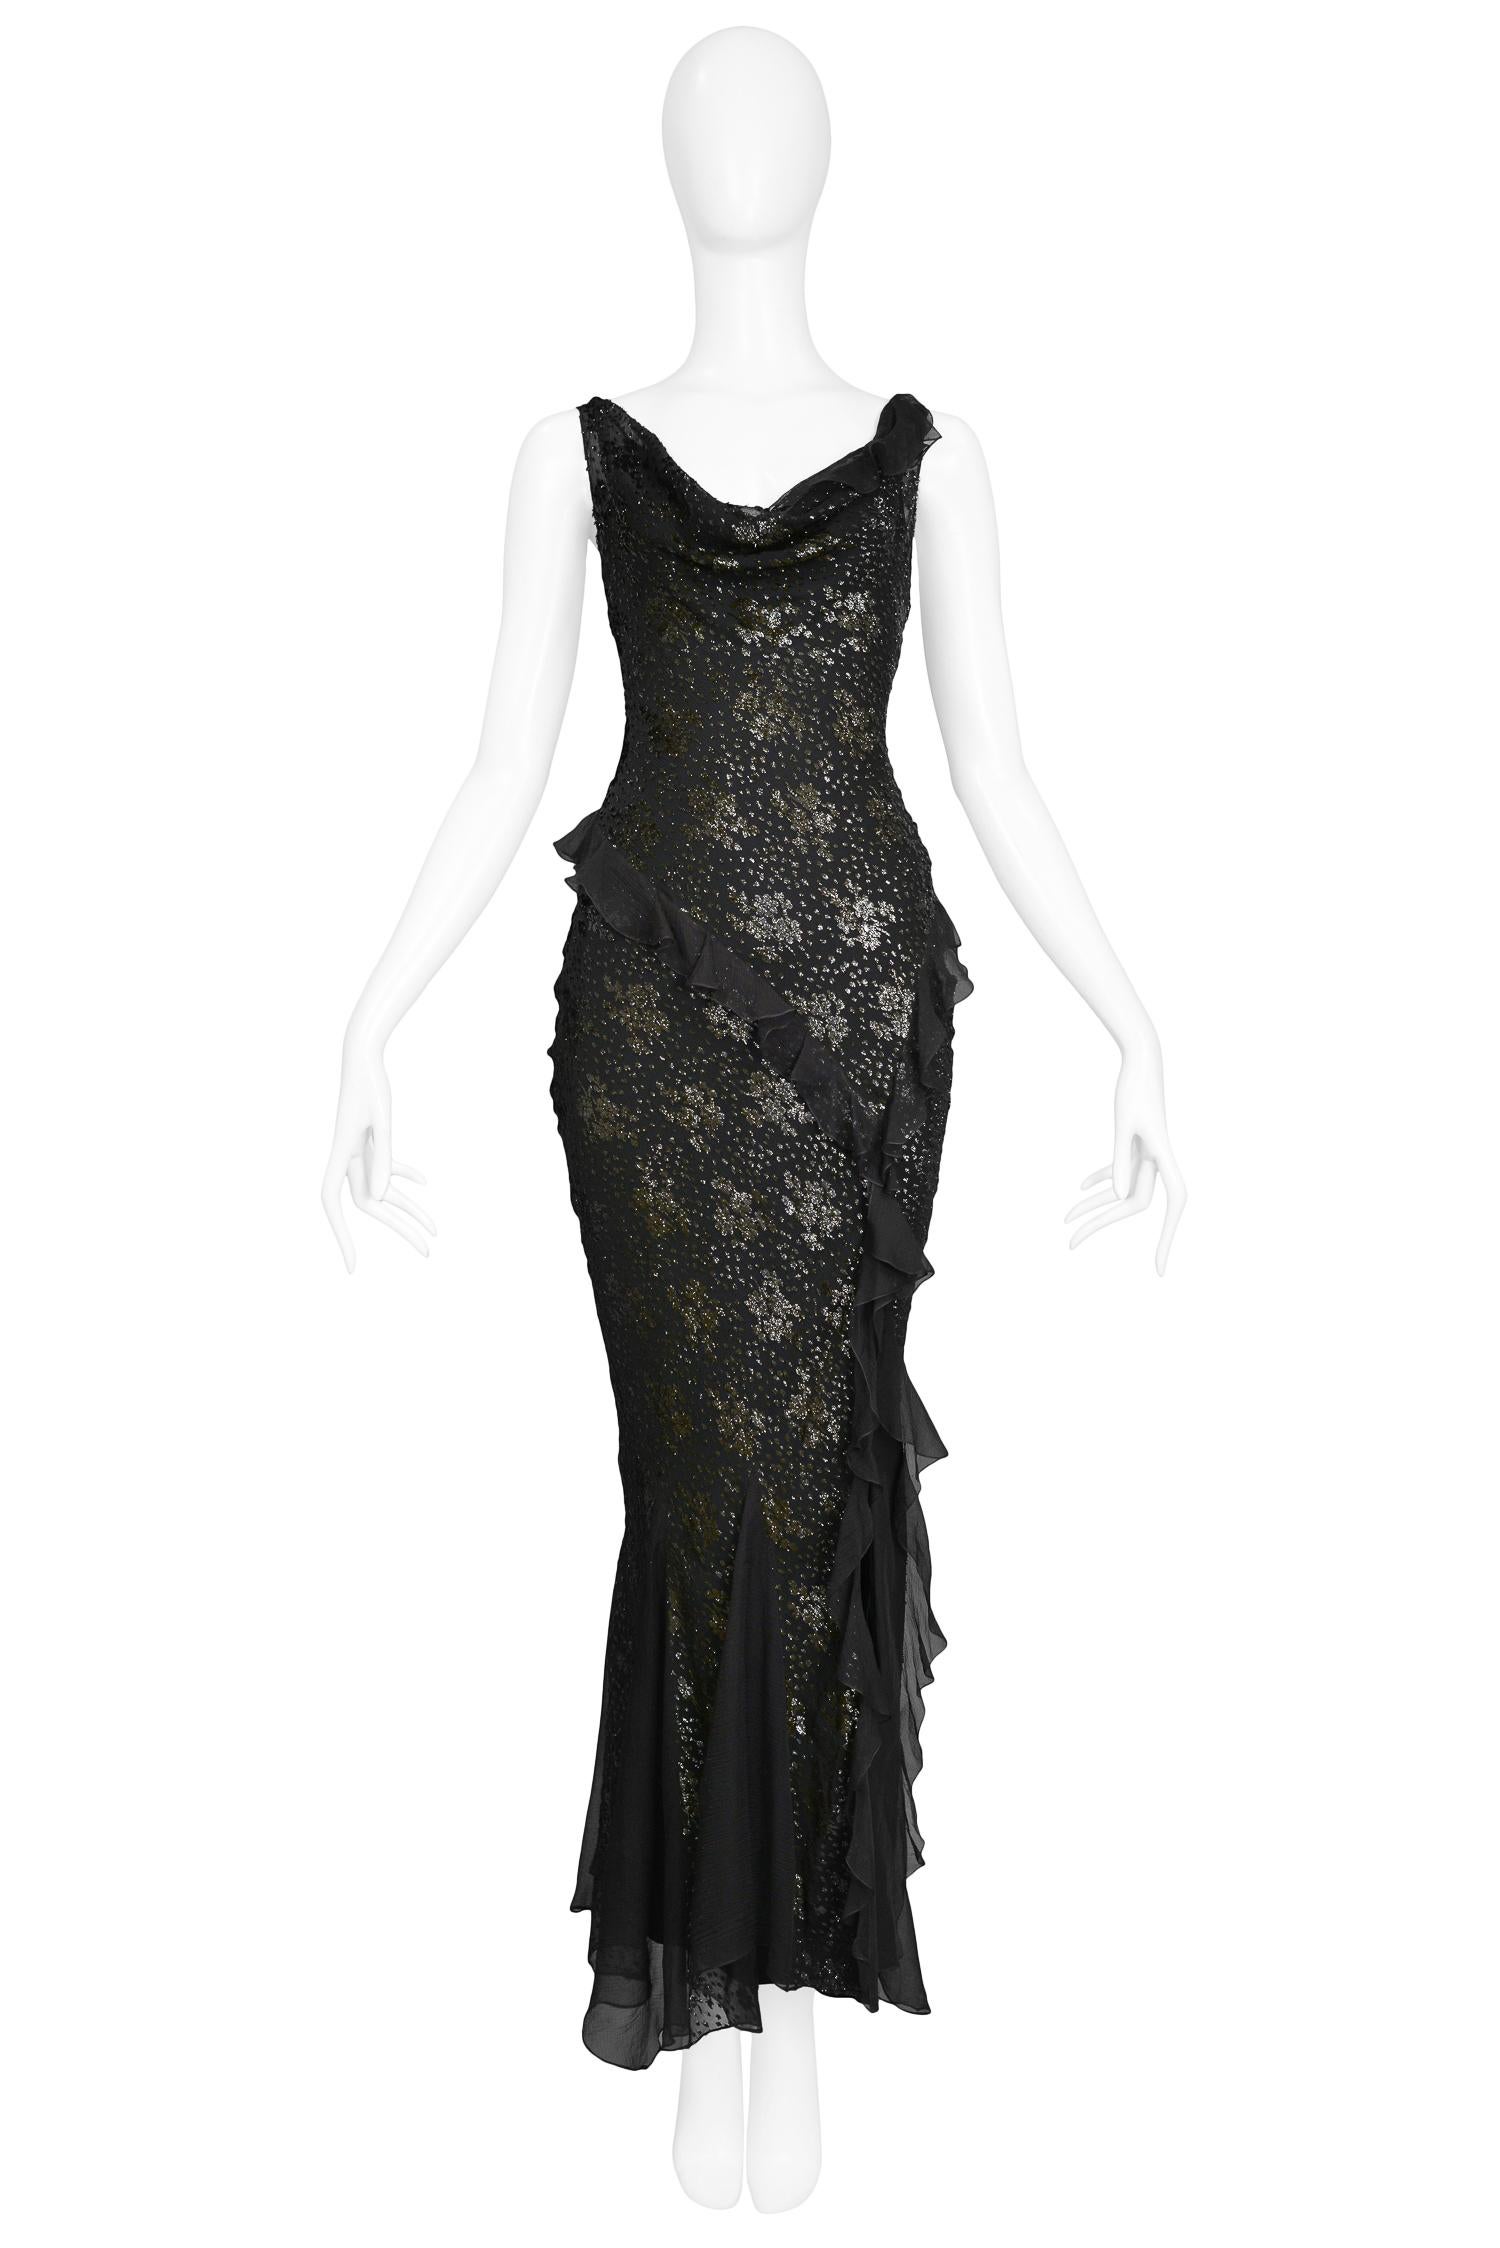 Vintage John Galliano for Christian Dior black silk & metallic floral embroidered burnout gown featuring a cowl neckline, side slit, chiffon ruffle panels and godet skirt detail.

Excellent Vintage Condition.

Size 40

Measurements:
Bust 32